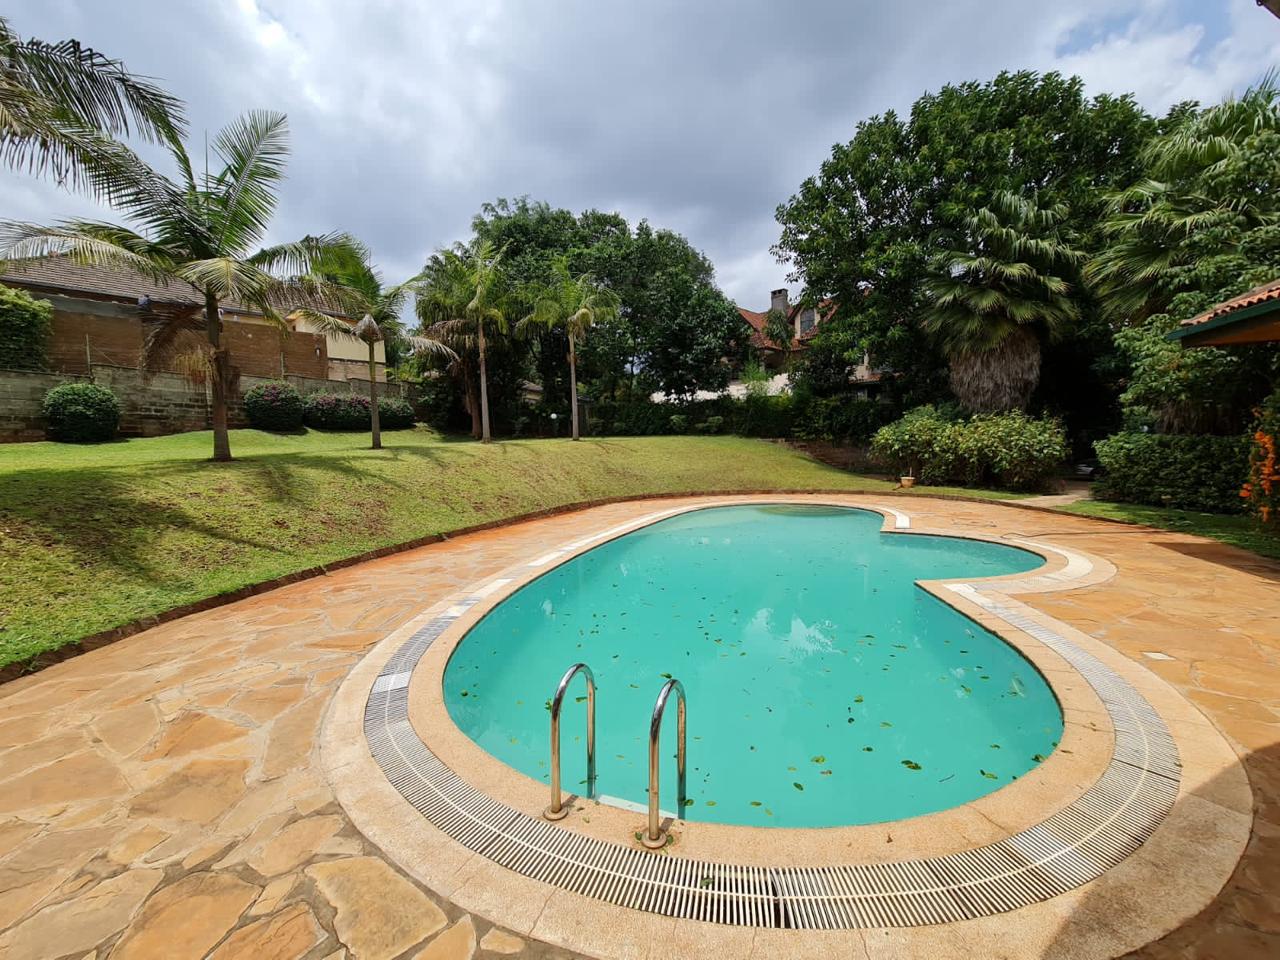 5 Bedroom Townhouse, all ensuite, in a gated community, with garden, pool, club house, back up power. located in Lower Kabete, for rent at Ksh400k (11)